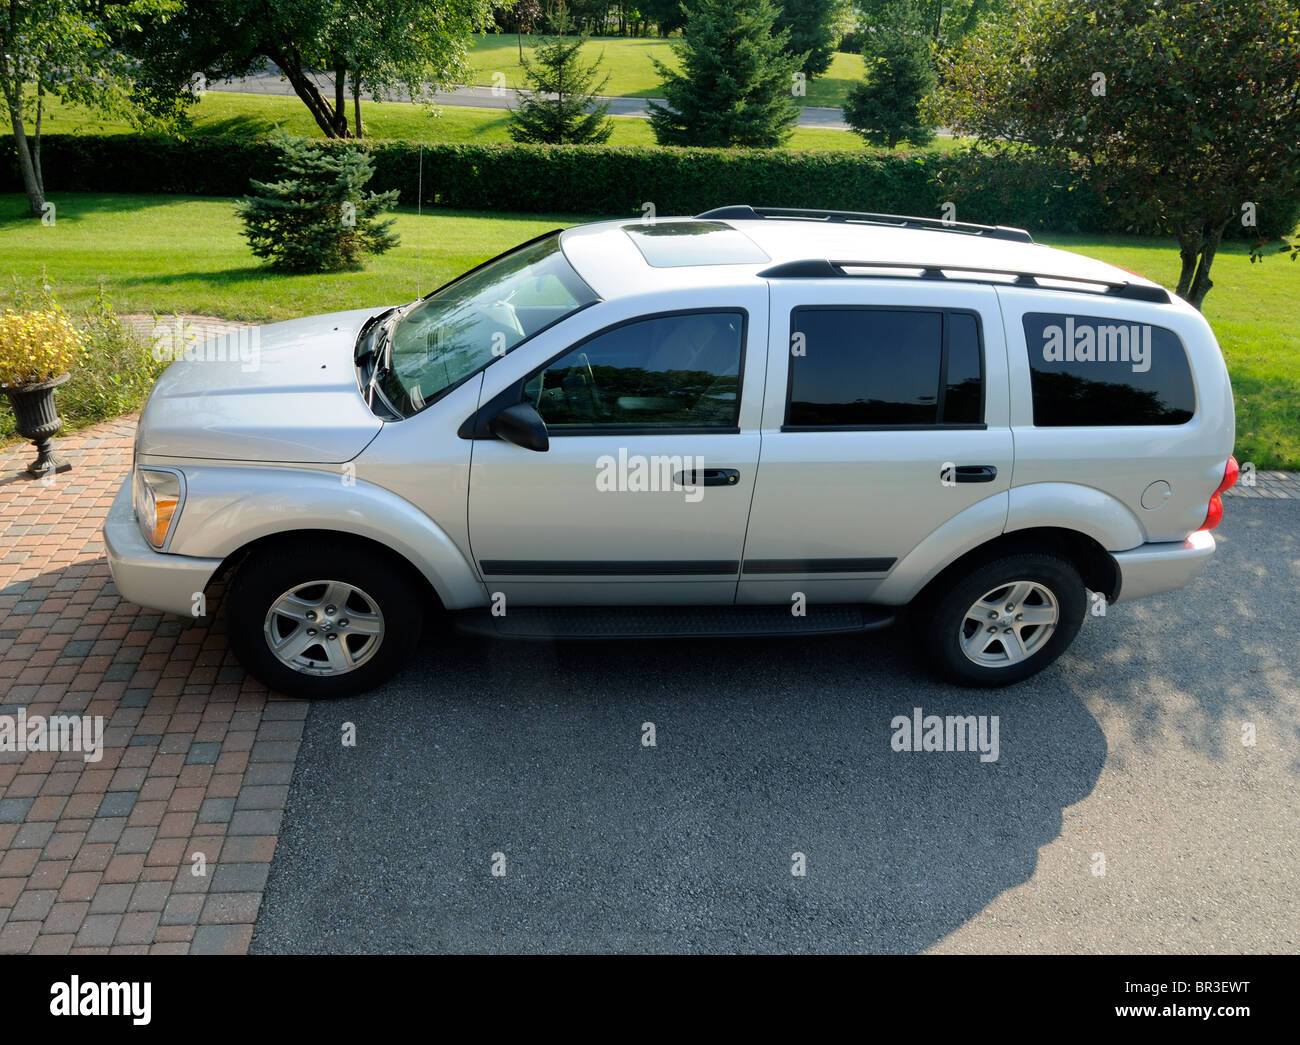 Silver Colored Dodge Durango Sport Utility Truck Photographed From Above  Stock Photo - Alamy